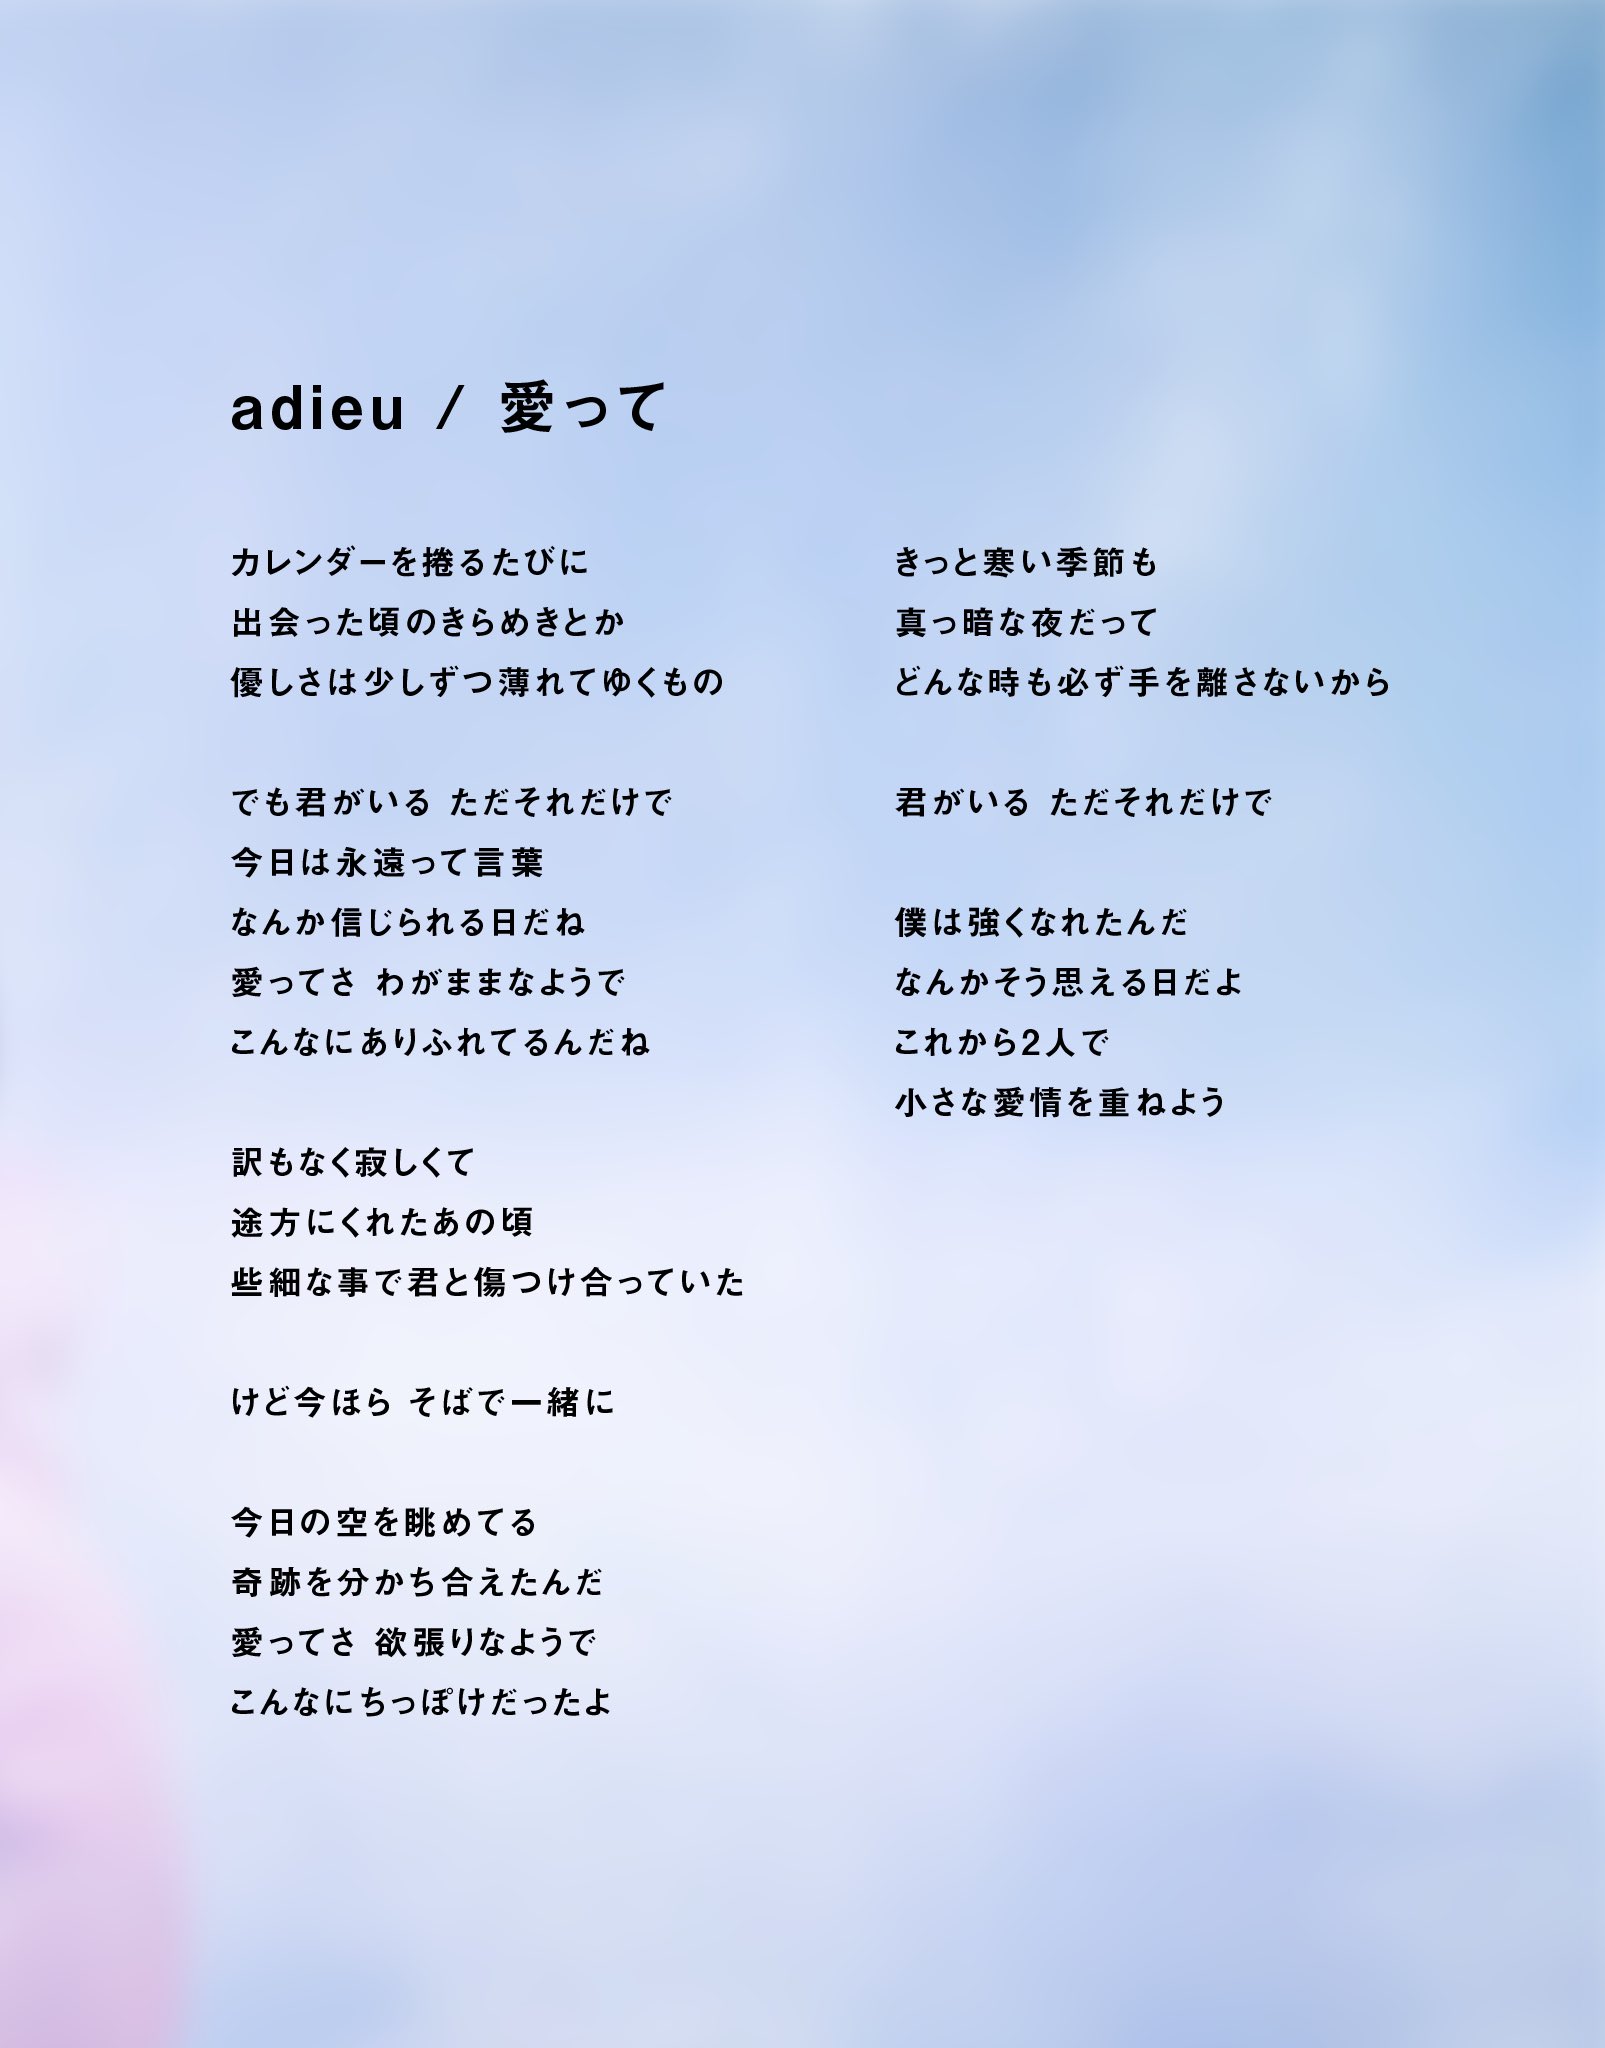 Adieu Creative Staff On Twitter Ai Tte Is Out Now Across All Digital Platforms We Also Made English Lyrics For Ai Tte So Have Fun Comparing The English And Japanese Lyrics Keep Sending